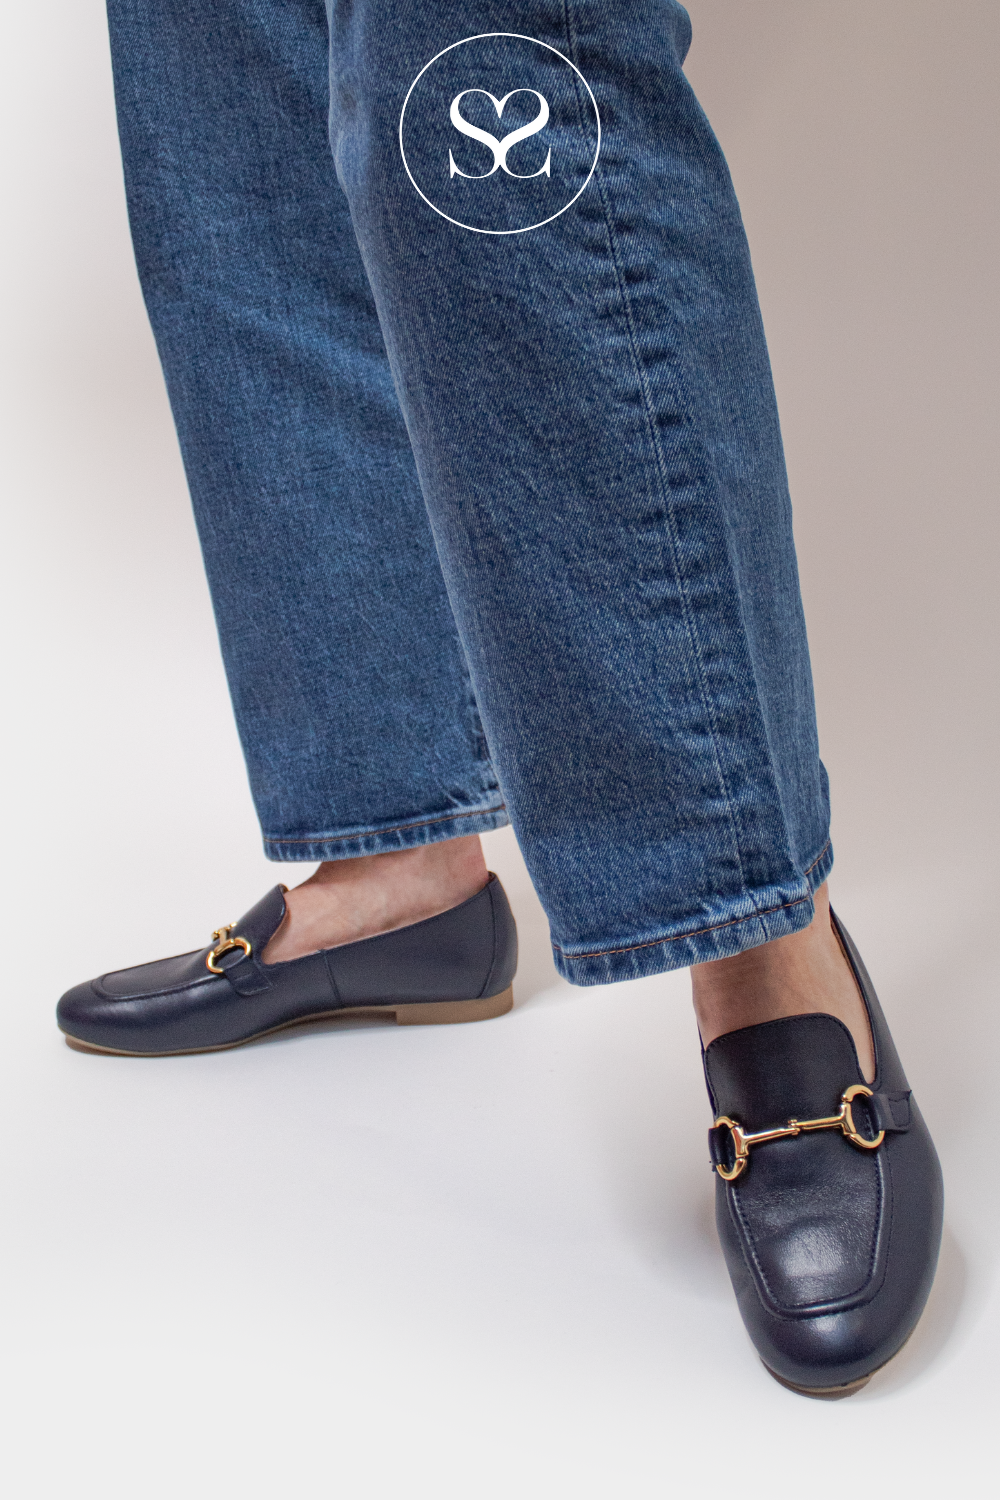 PAUL GREEN 2596 NAVY LEATHER LOAFERS